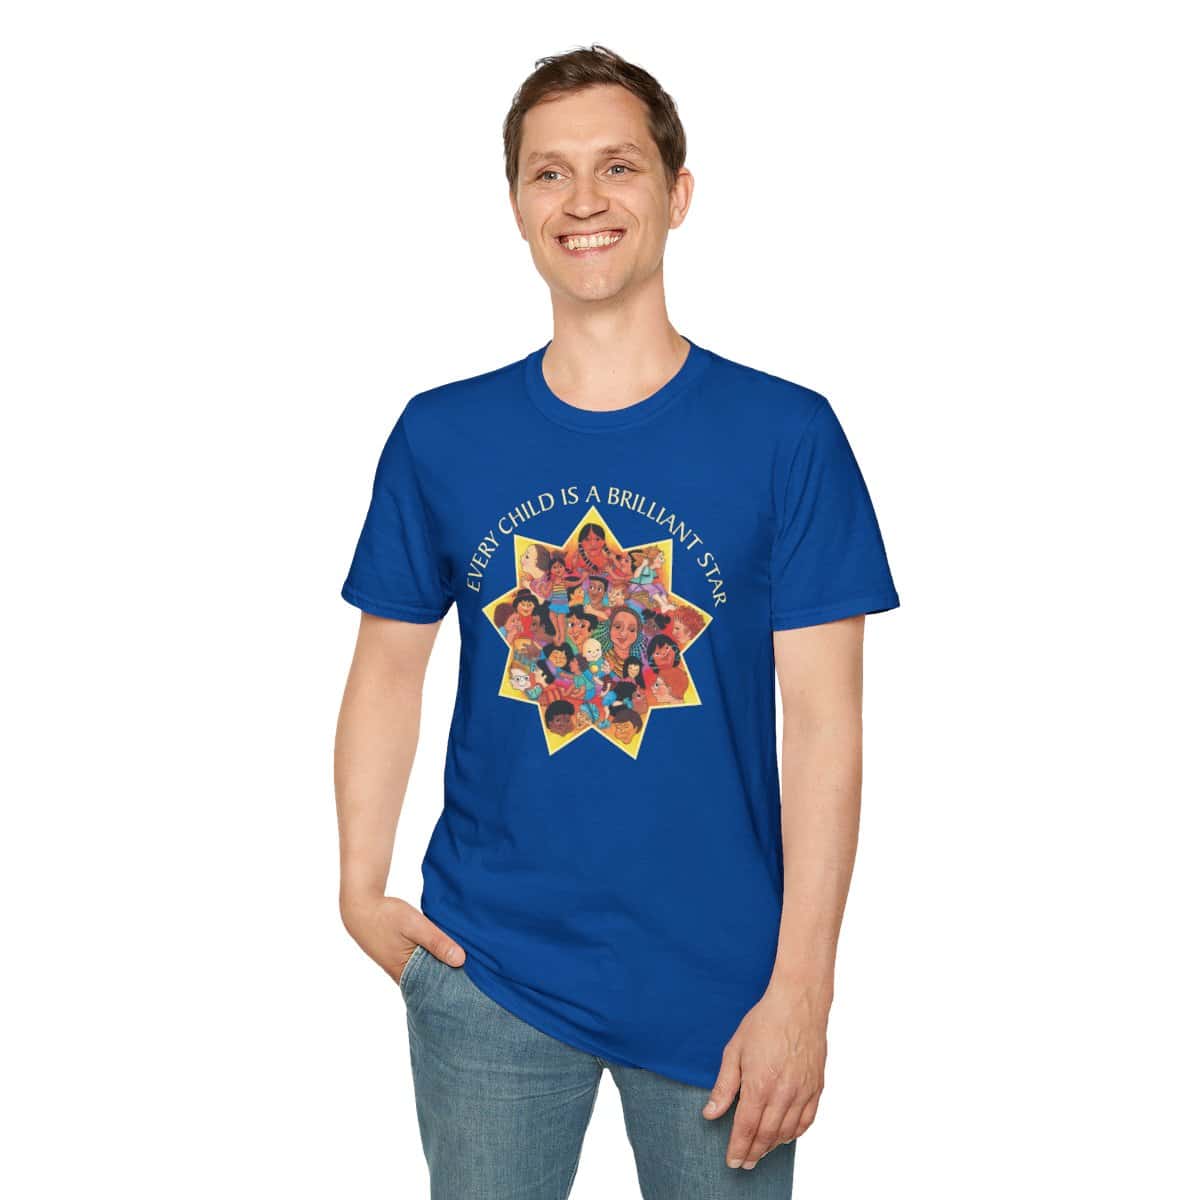 Every Child is a Brilliant Star T-Shirt - Bahai Resources